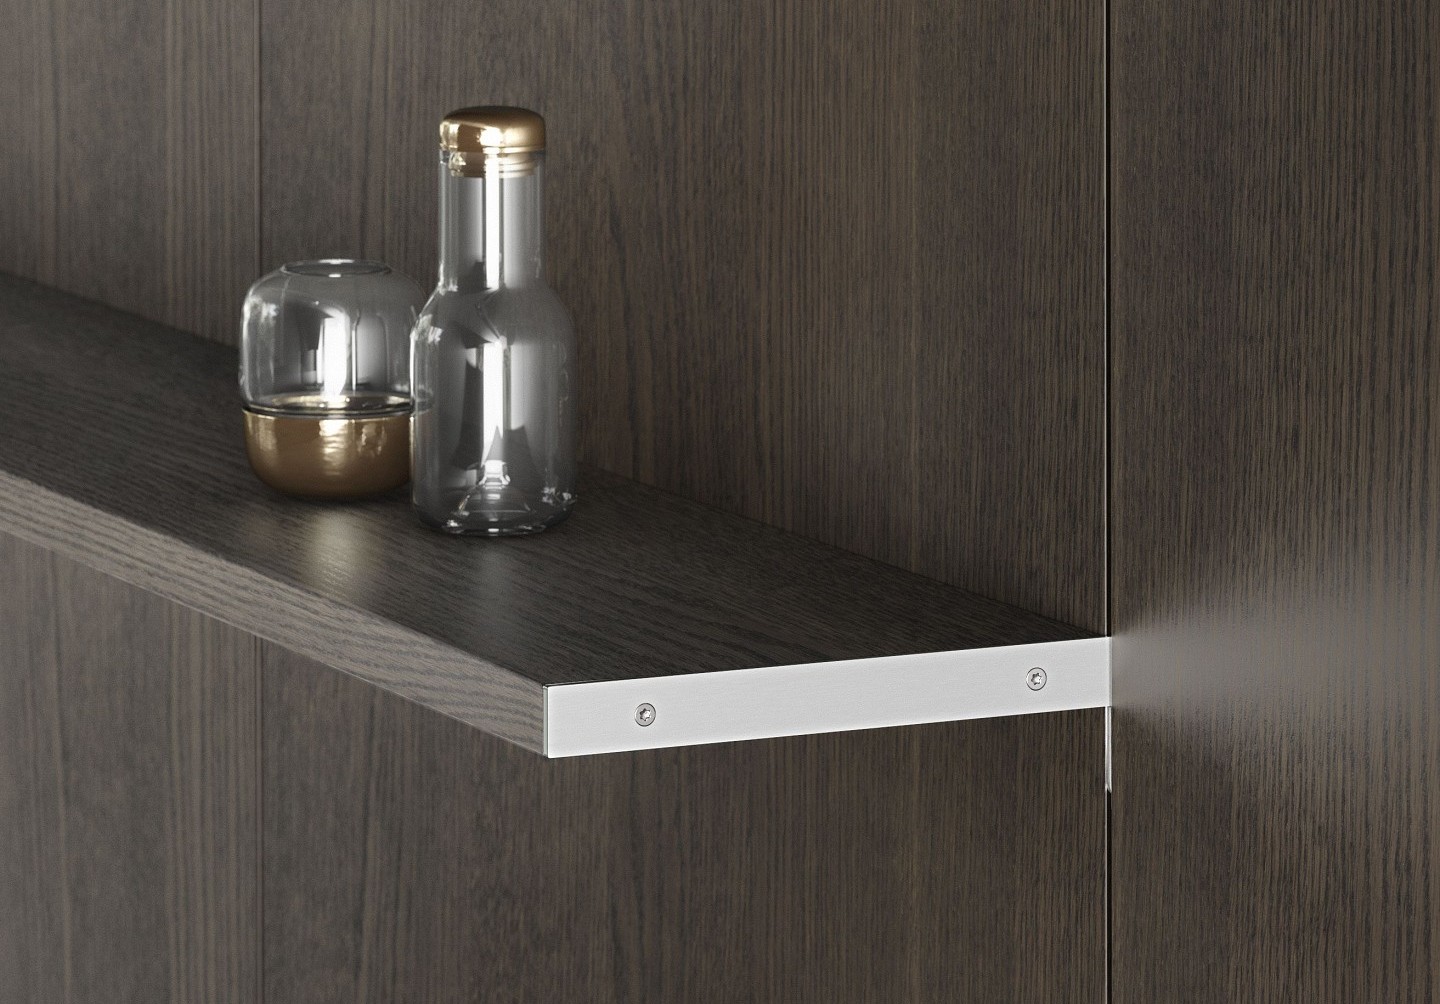 Veneer shelves in the panel system SieMatic FloatingSpaces provide additional storage space for the kitchen